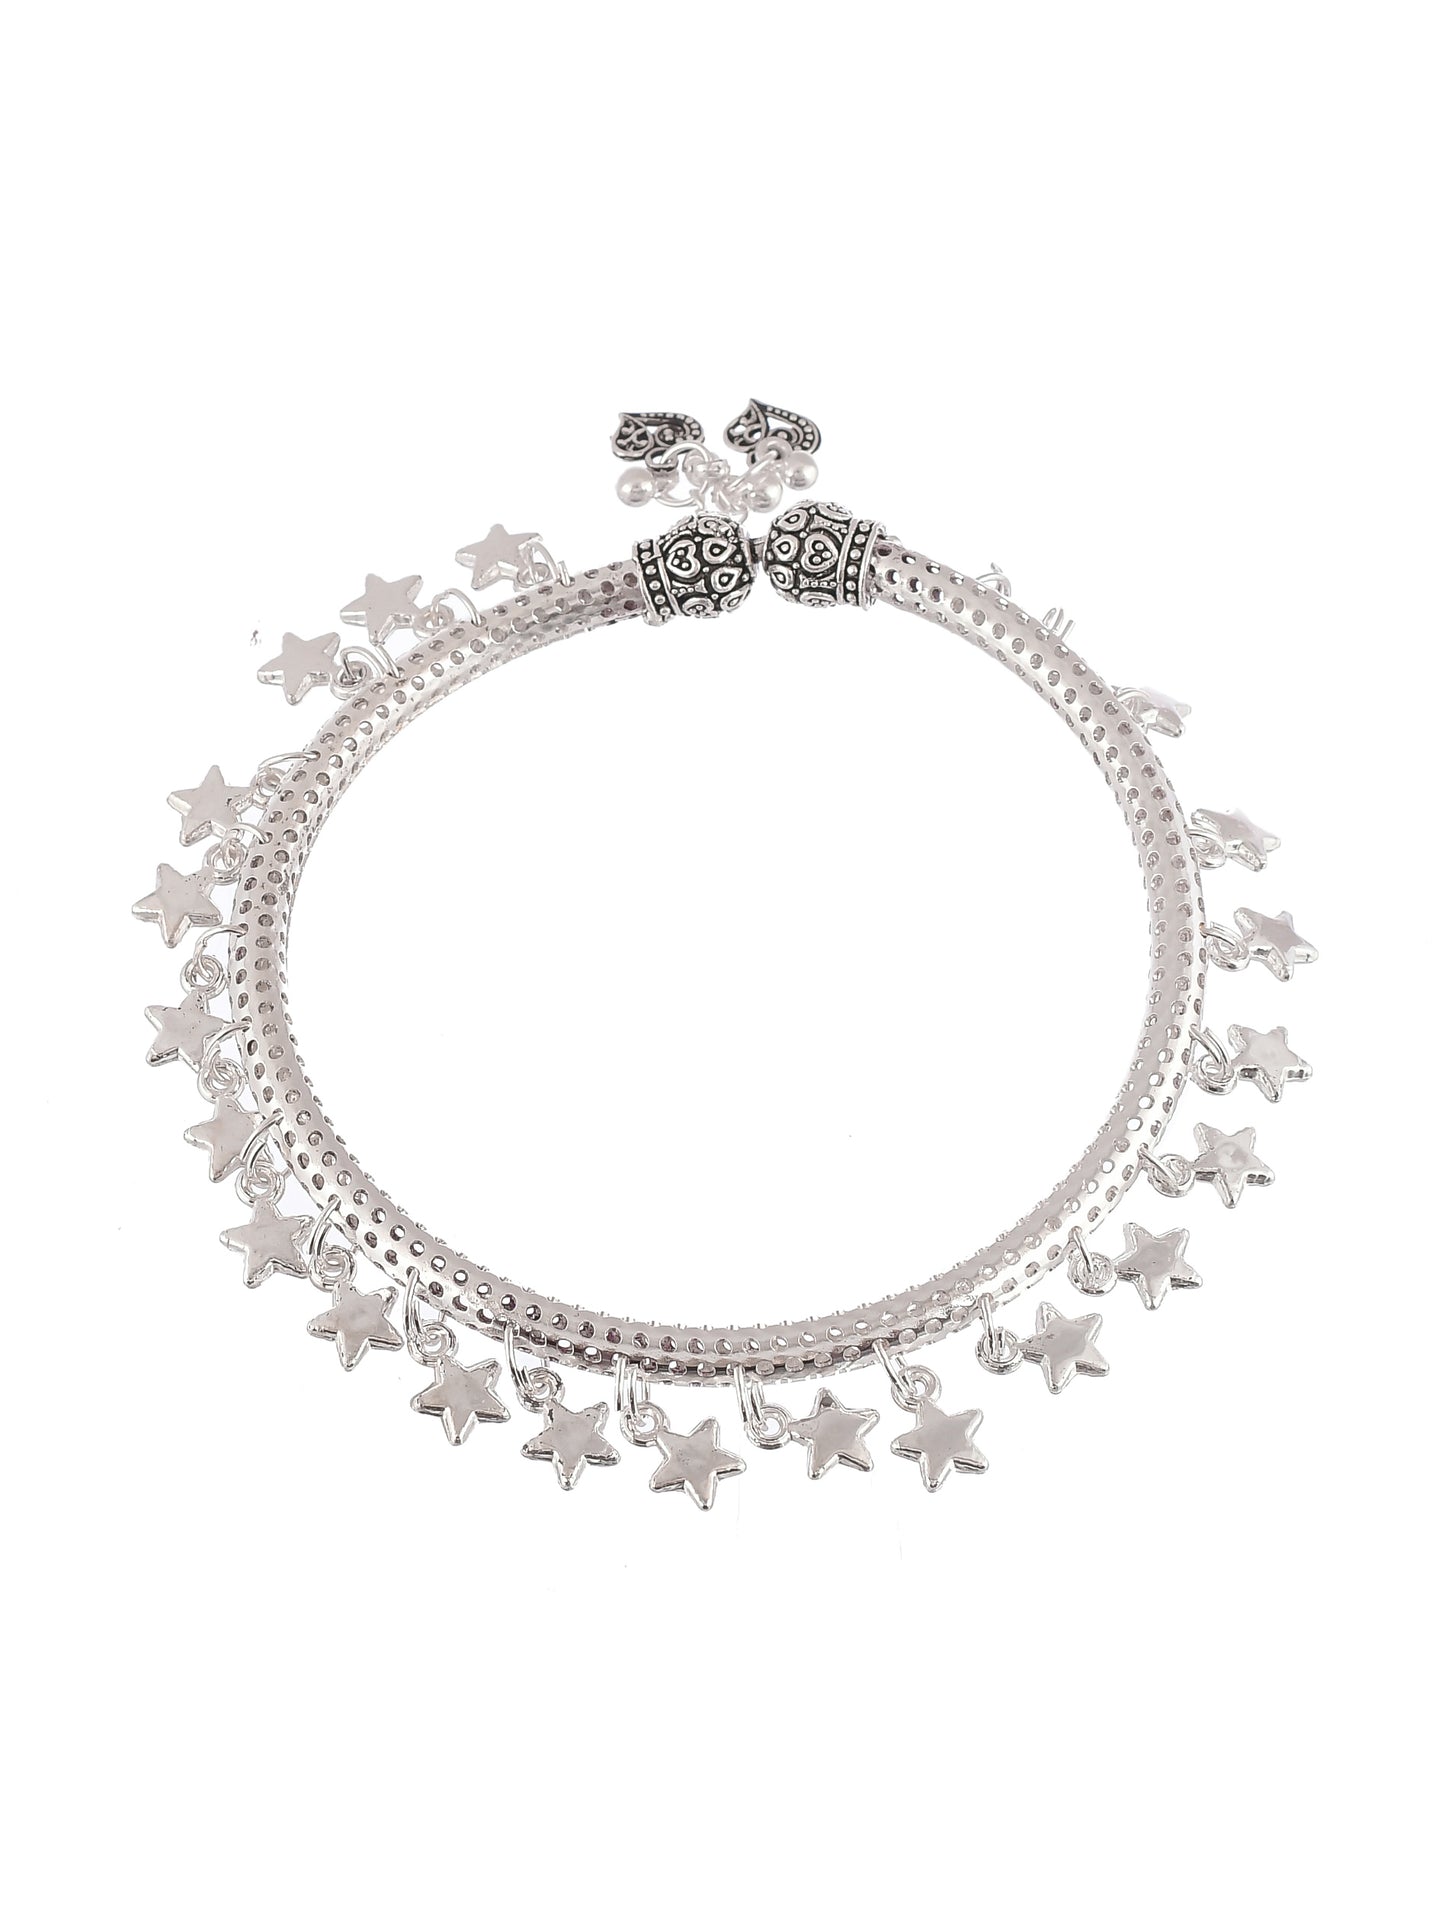 Star charm Silver plated kada anklet